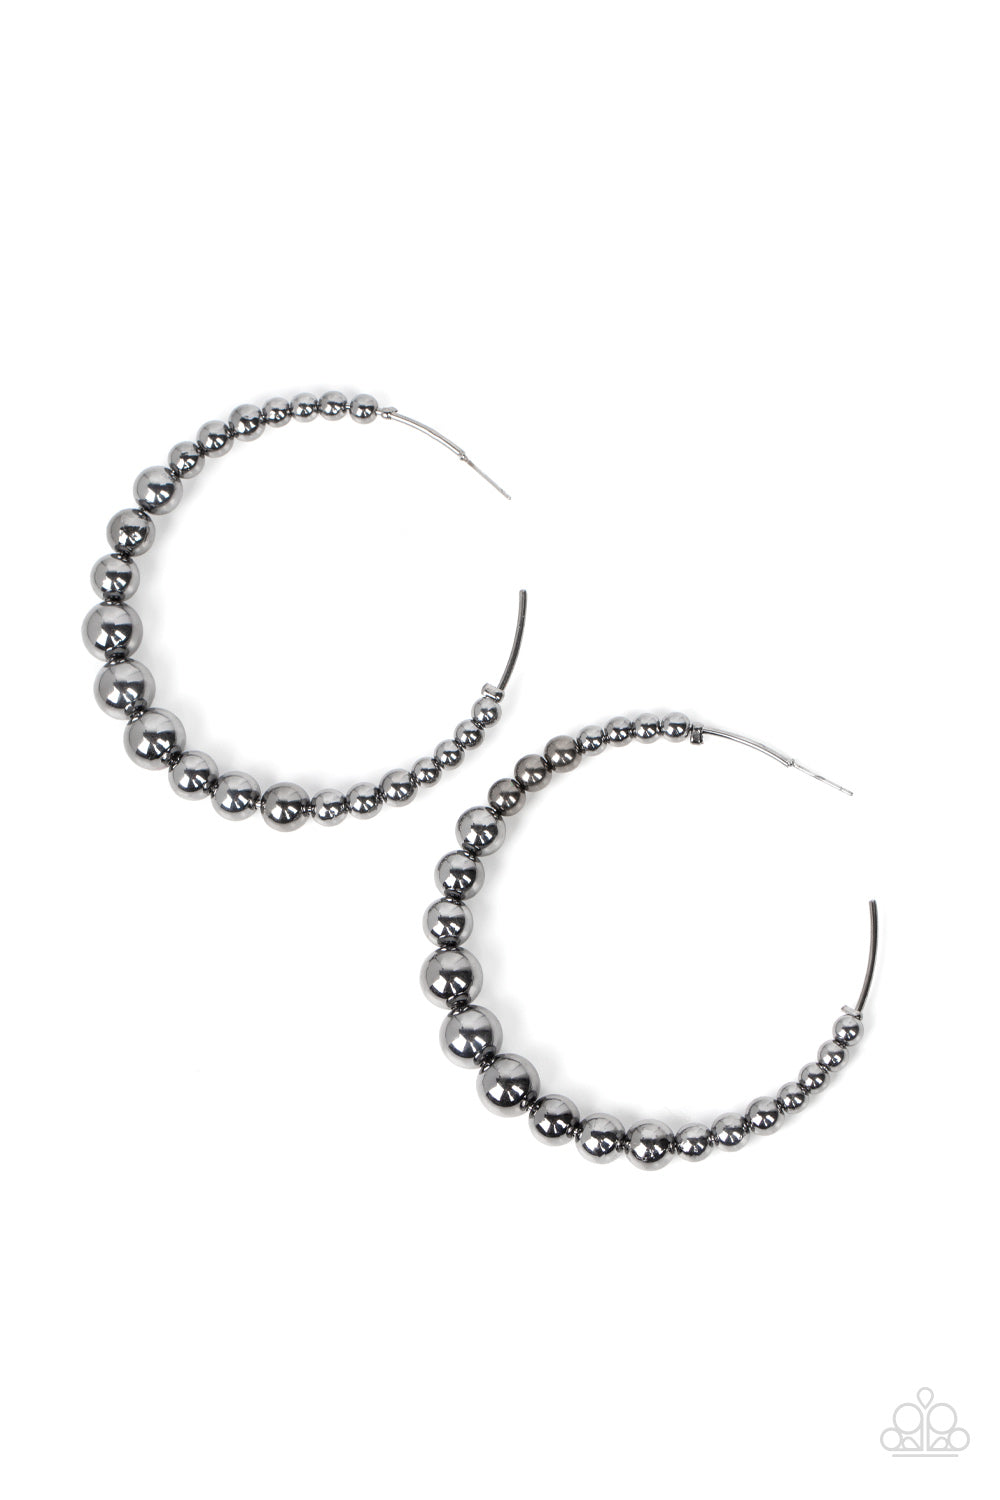 Gradually increasing in size, glistening gunmetal beads are threaded along an oversized gunmetal hoop for a gritty and glamorous effect. Earring attaches to a standard post fitting. Hoop measures approximately 2 1/2" in diameter.  Sold as one pair of hoop earrings.